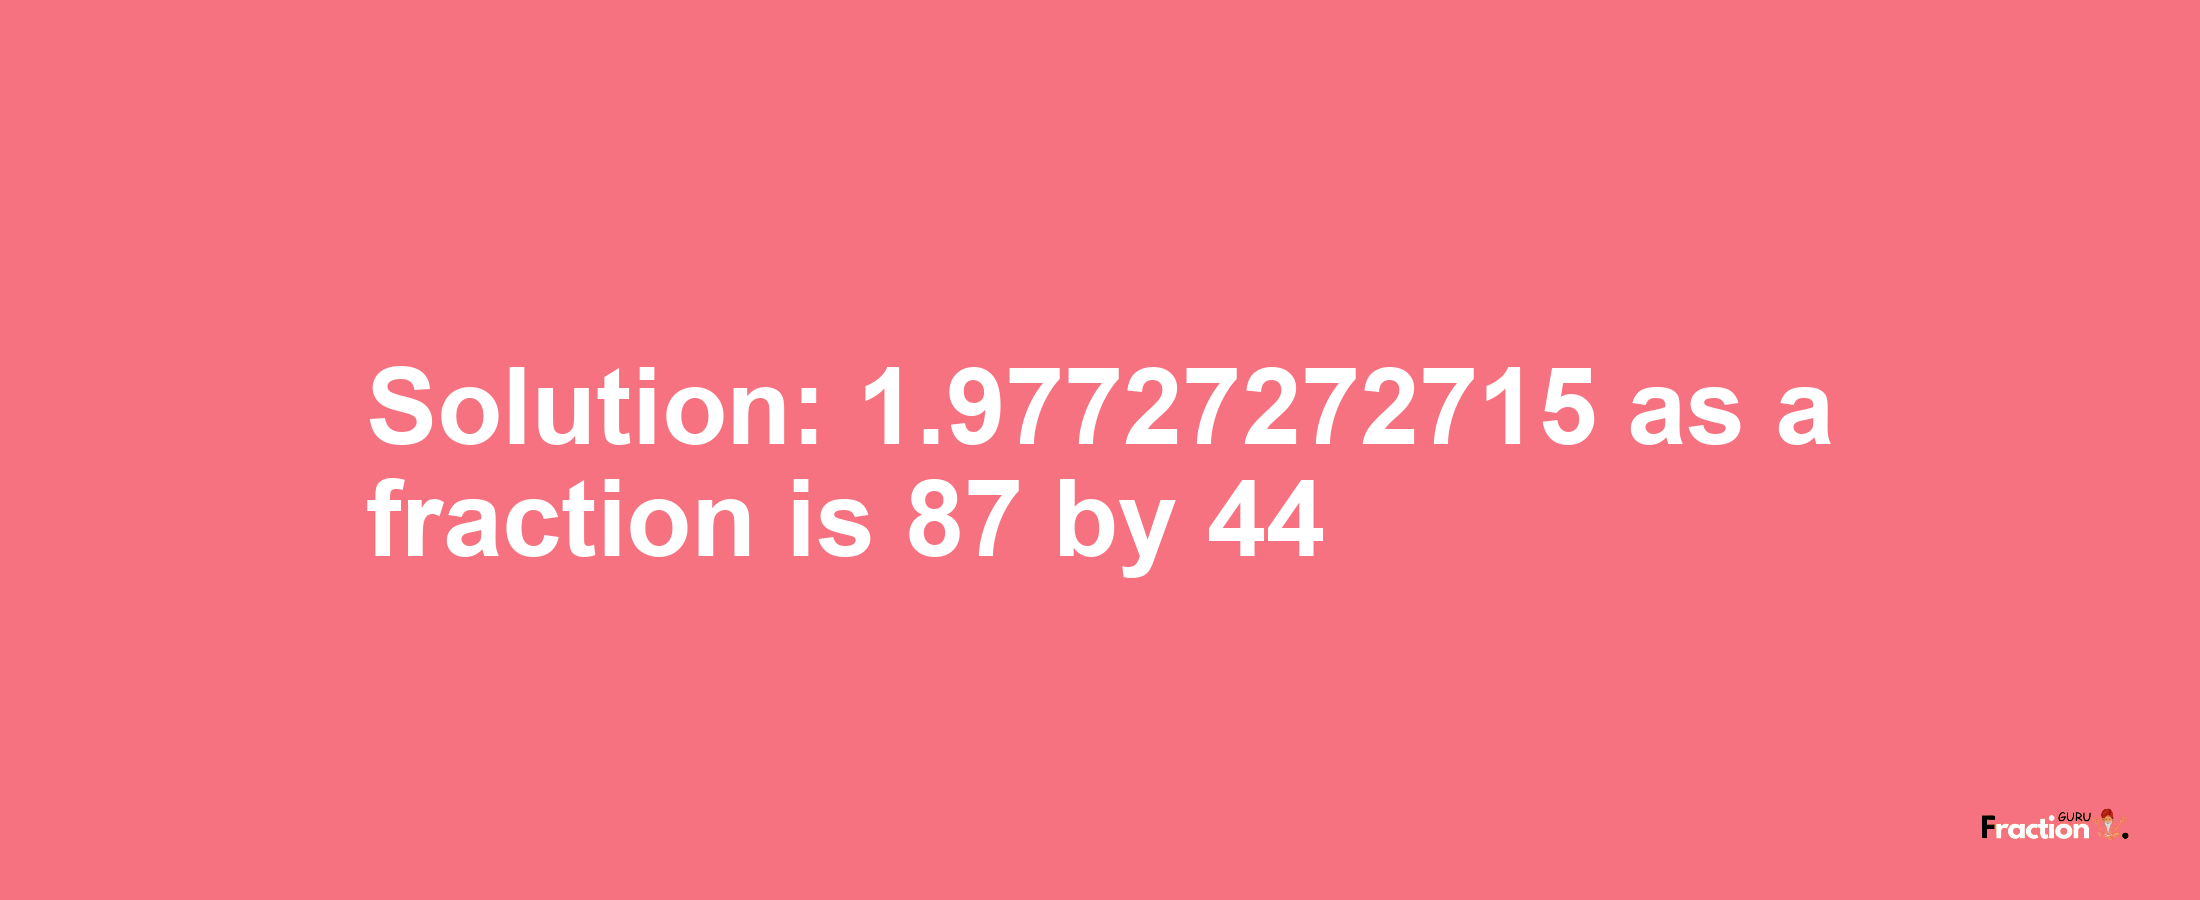 Solution:1.97727272715 as a fraction is 87/44